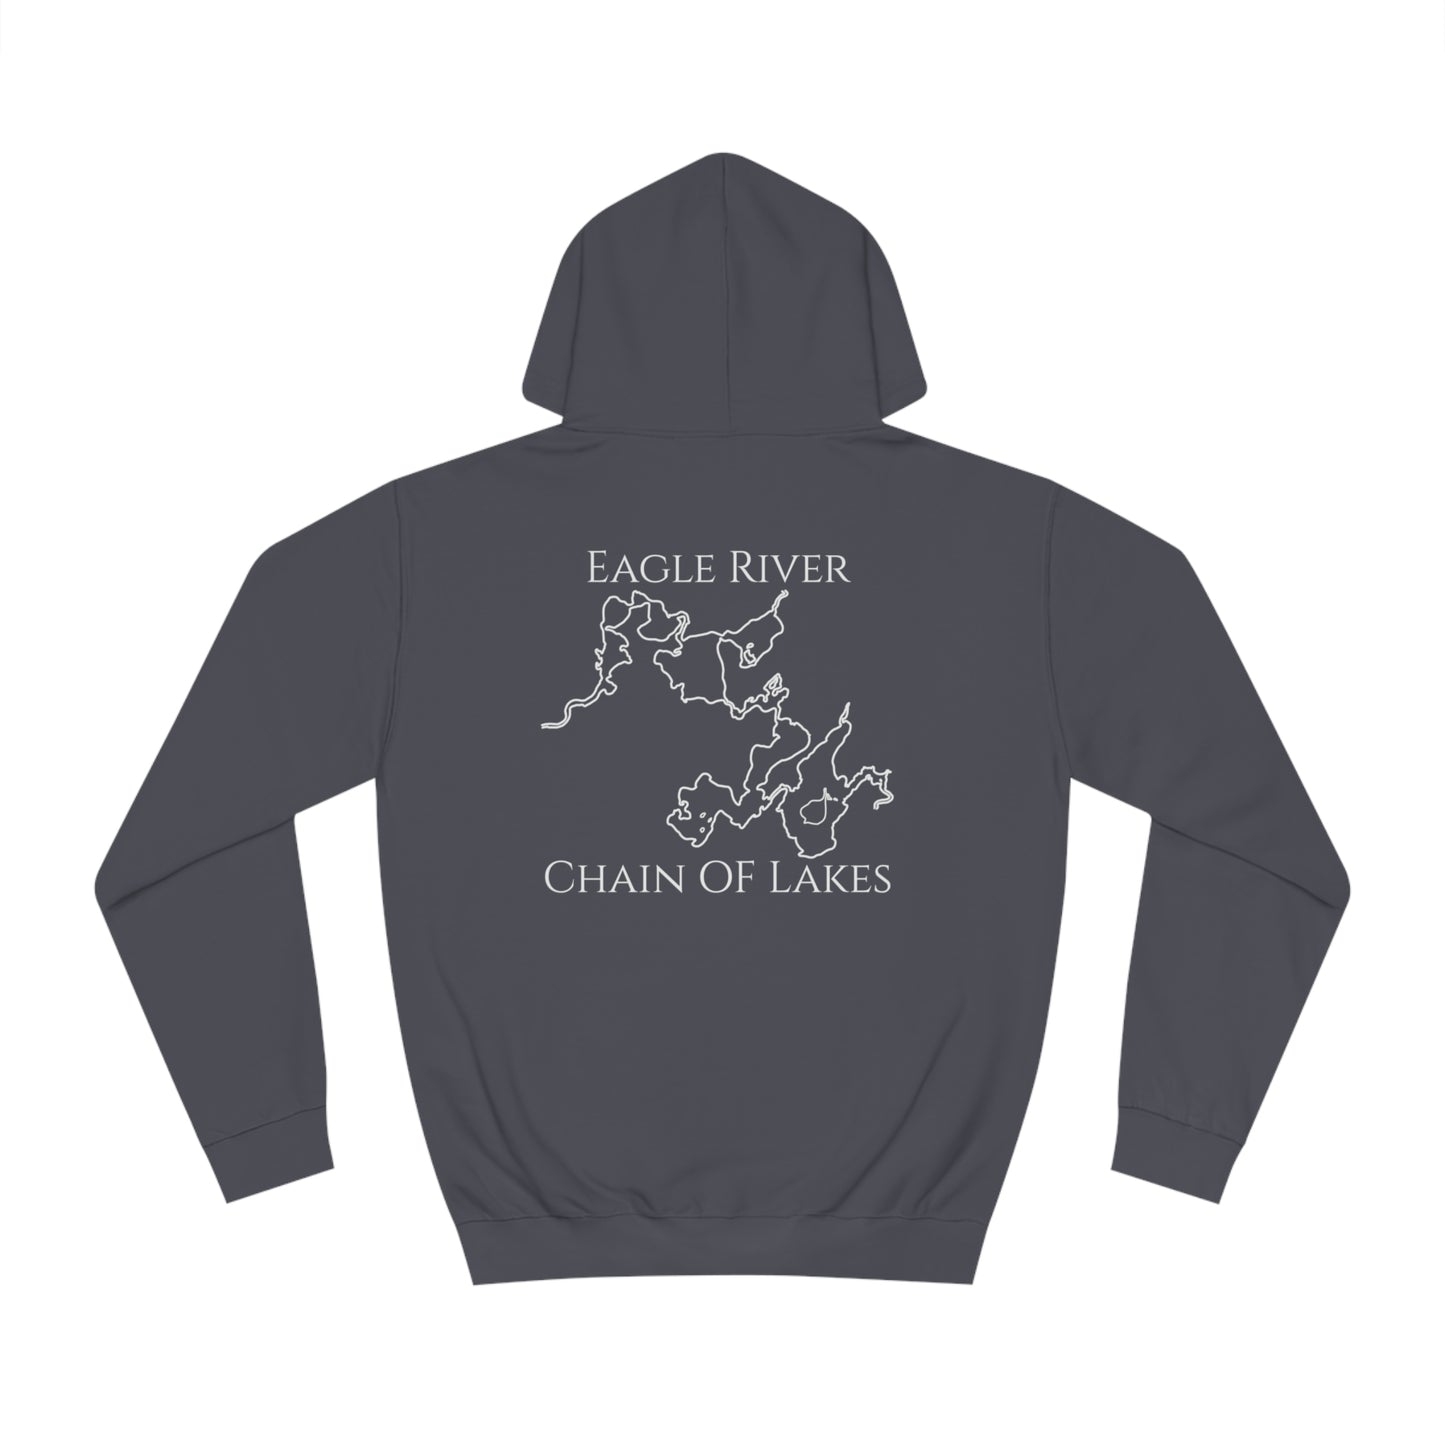 Eagle River Compass Rose Patch - Unisex Hoodie Medium Weight